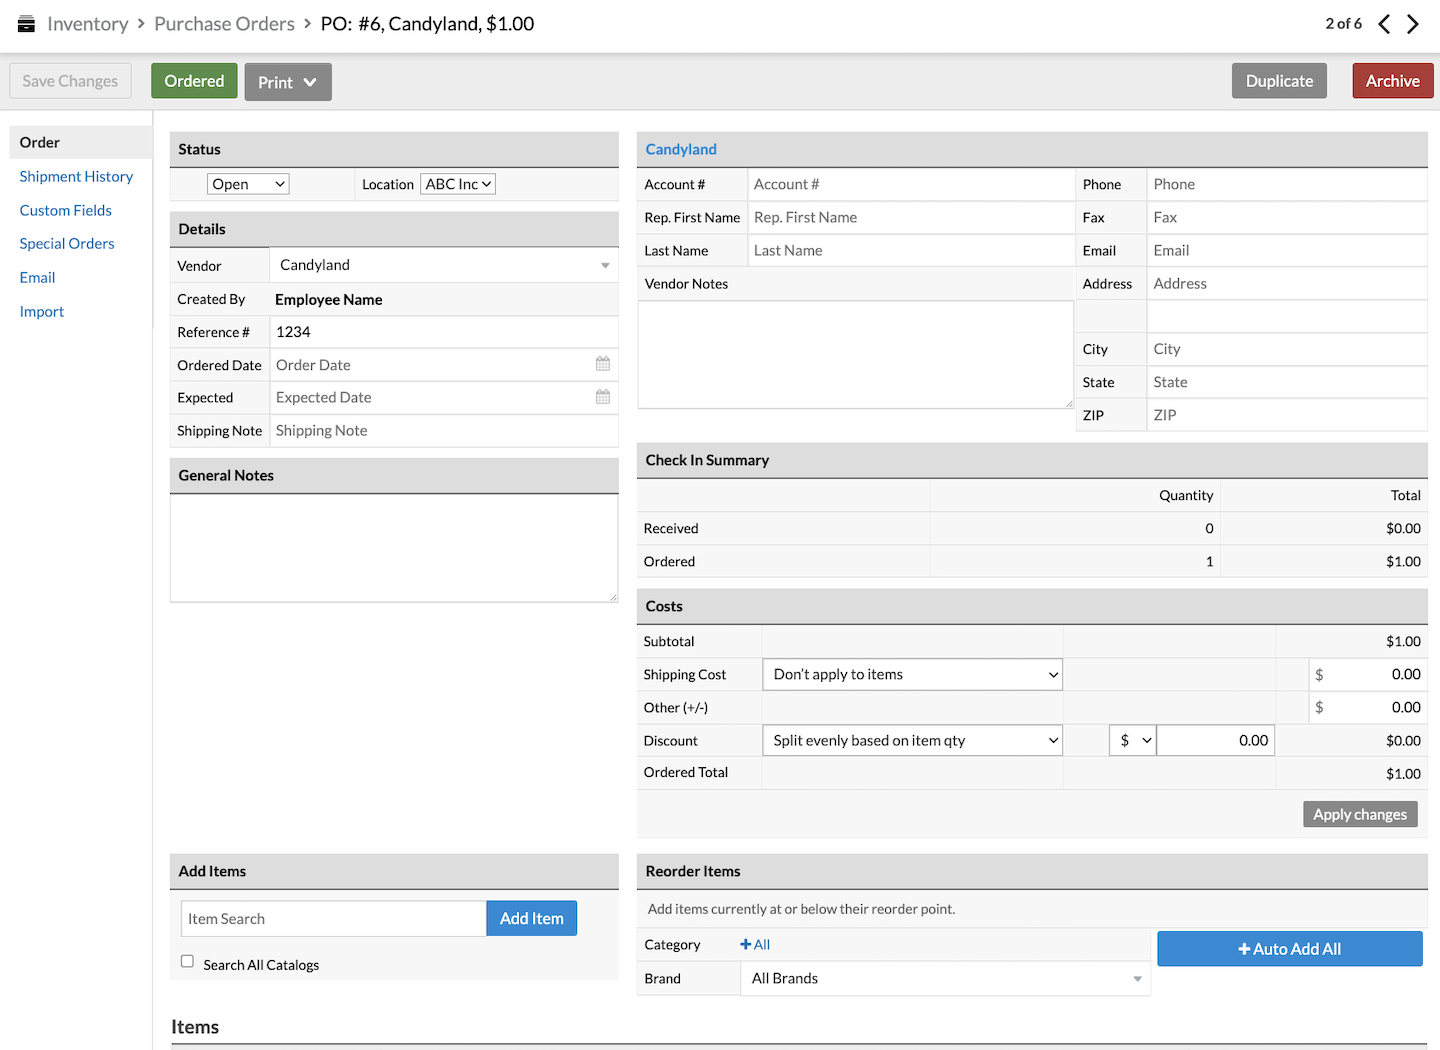 Main screen for the new purchase order, with sections for Status, Details, Vendor information, General Notes, Check In Summary, Costs, Add Items, and Reorder Items.